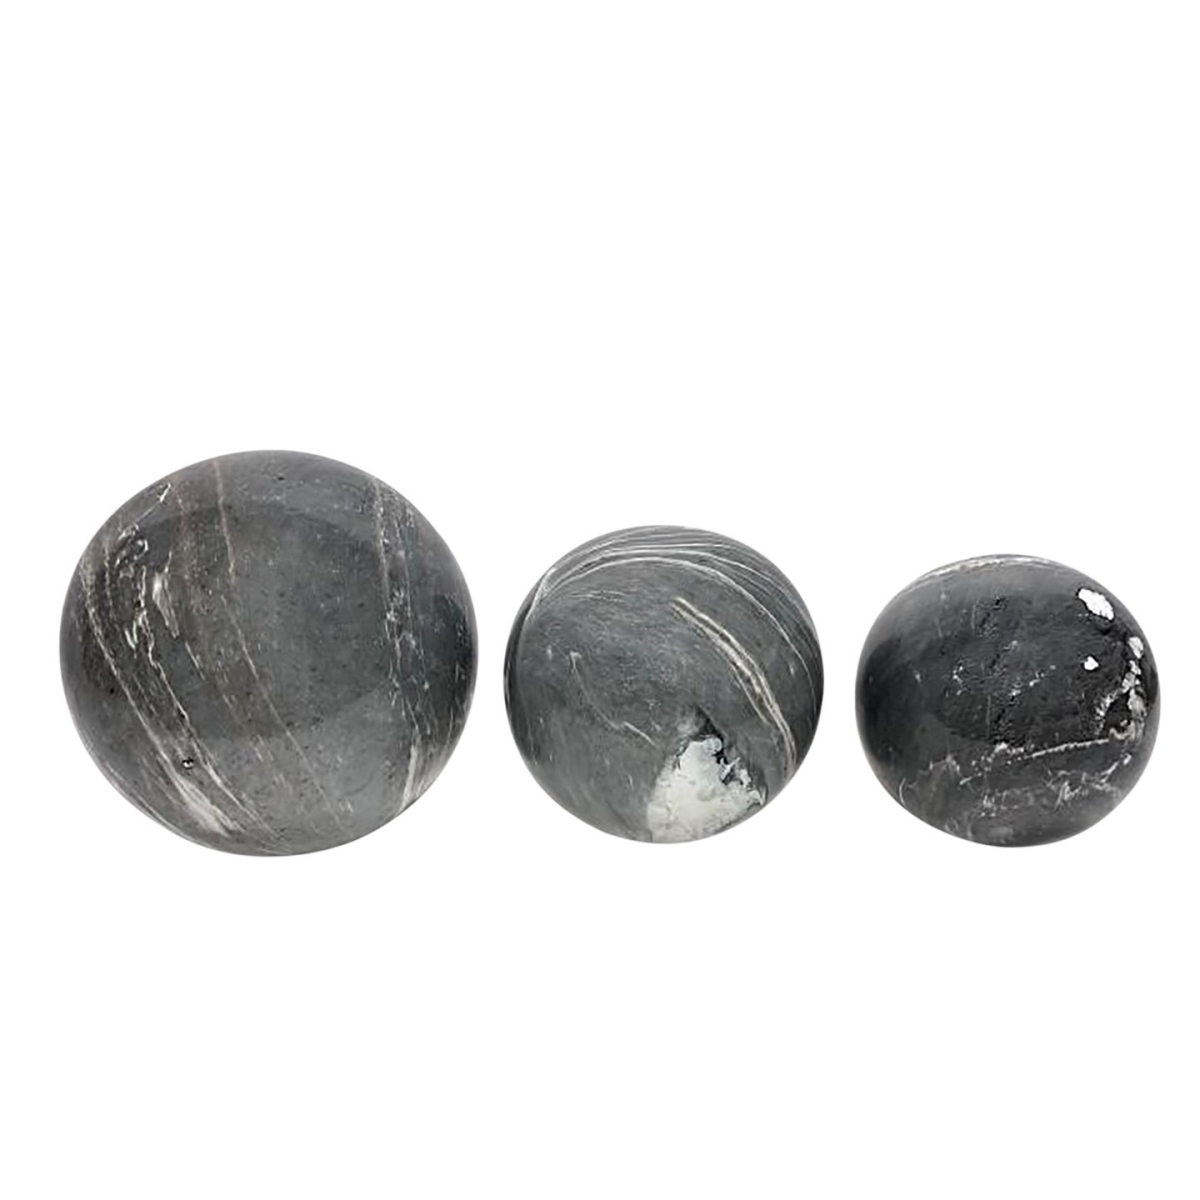 Picture of Sagebrook Home 16310-02 4-5-6 in. Marble Look Orbs, Gray - Set of 3